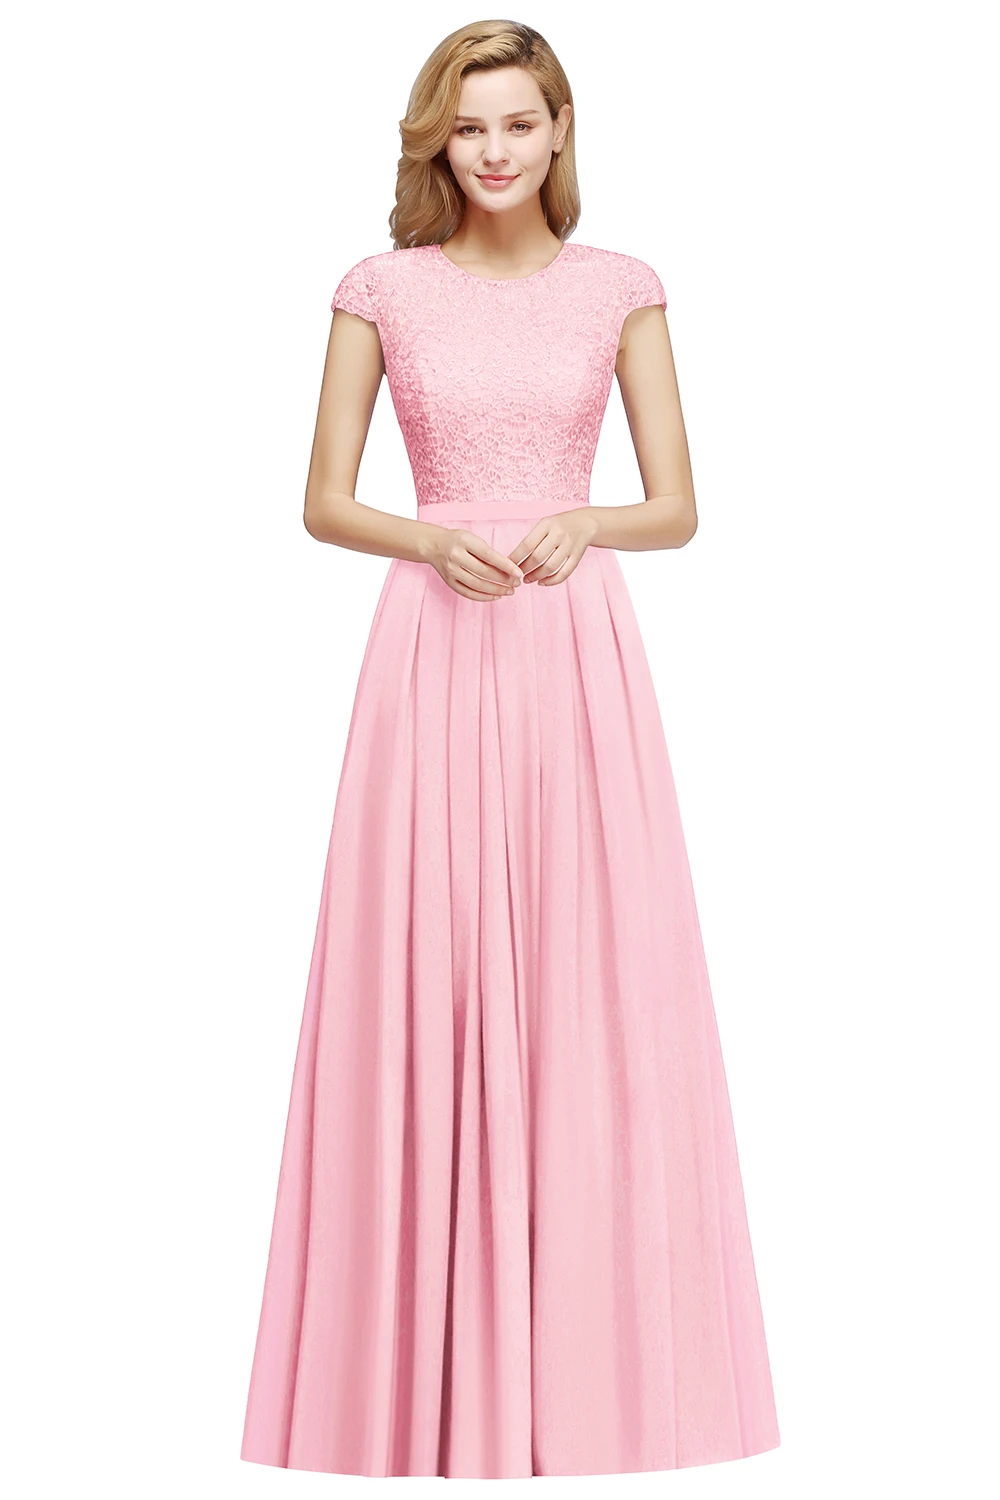 Navy Blue Elegant Short Sleeves Chiffon Candy Pink Lace Evening Dresses Women Formal Wedding Prom Party Gowns Robe De Soirée